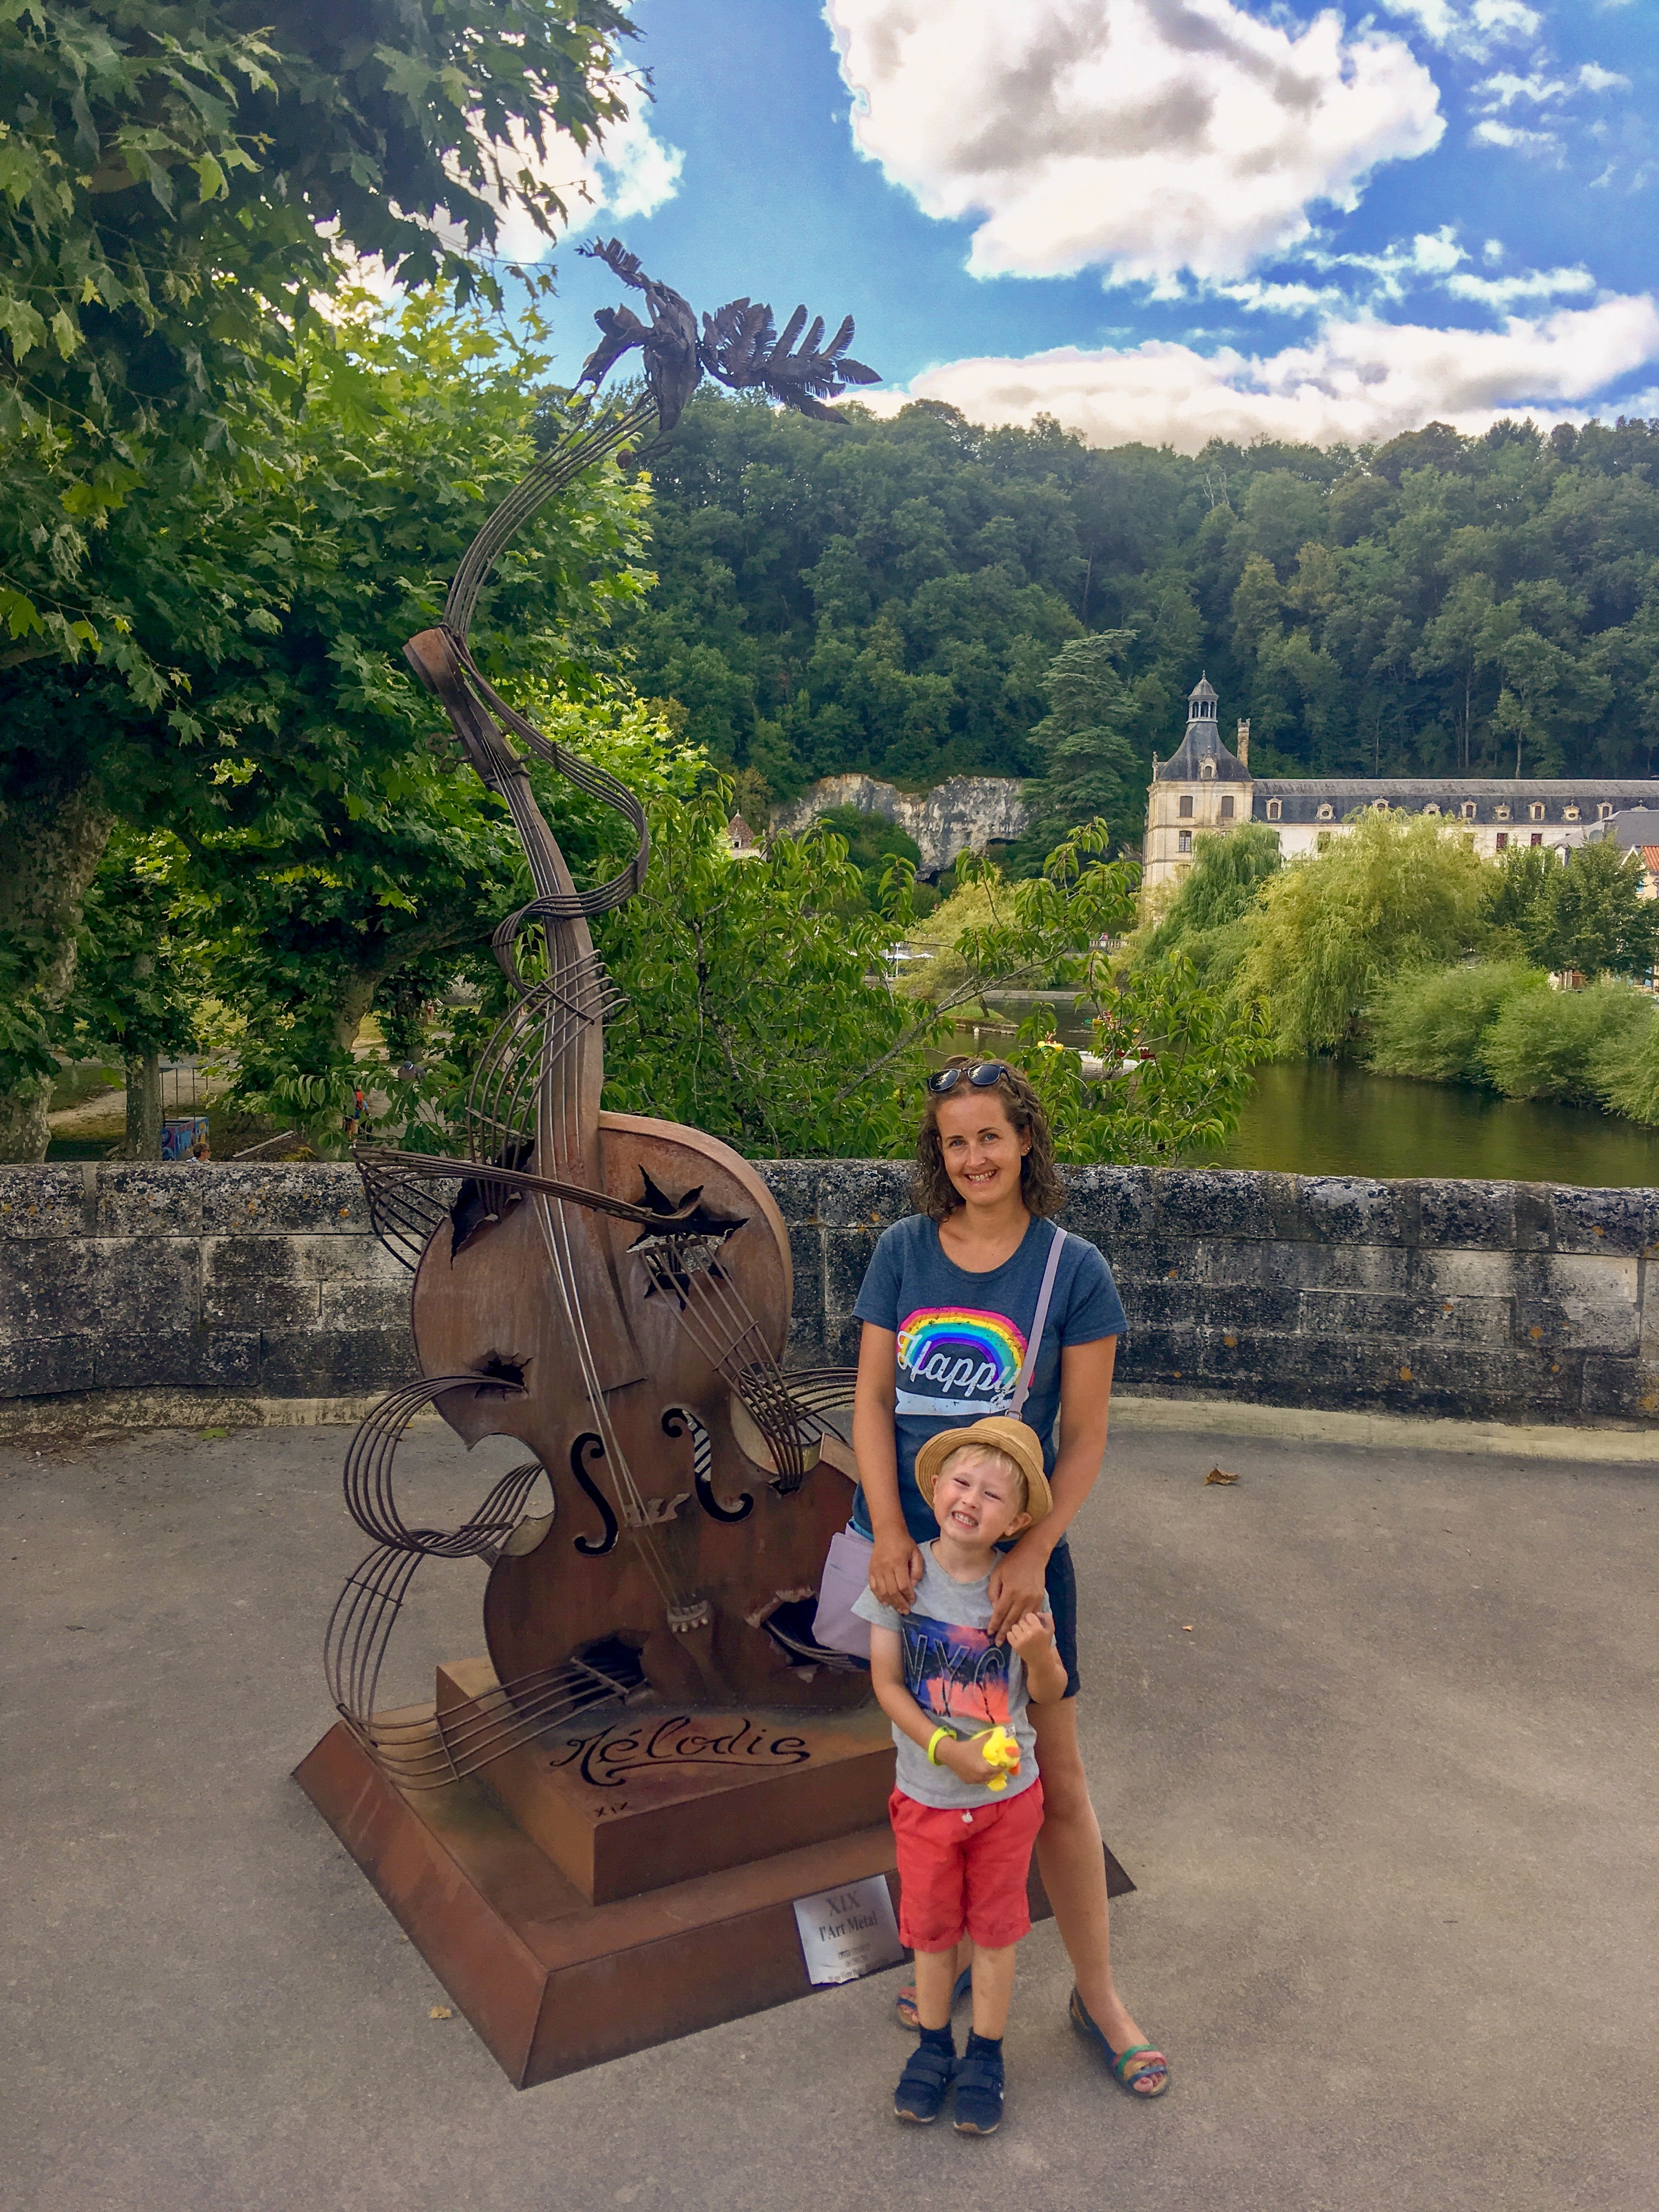 Lucas and I stood next to a violin sculpture in Brantome